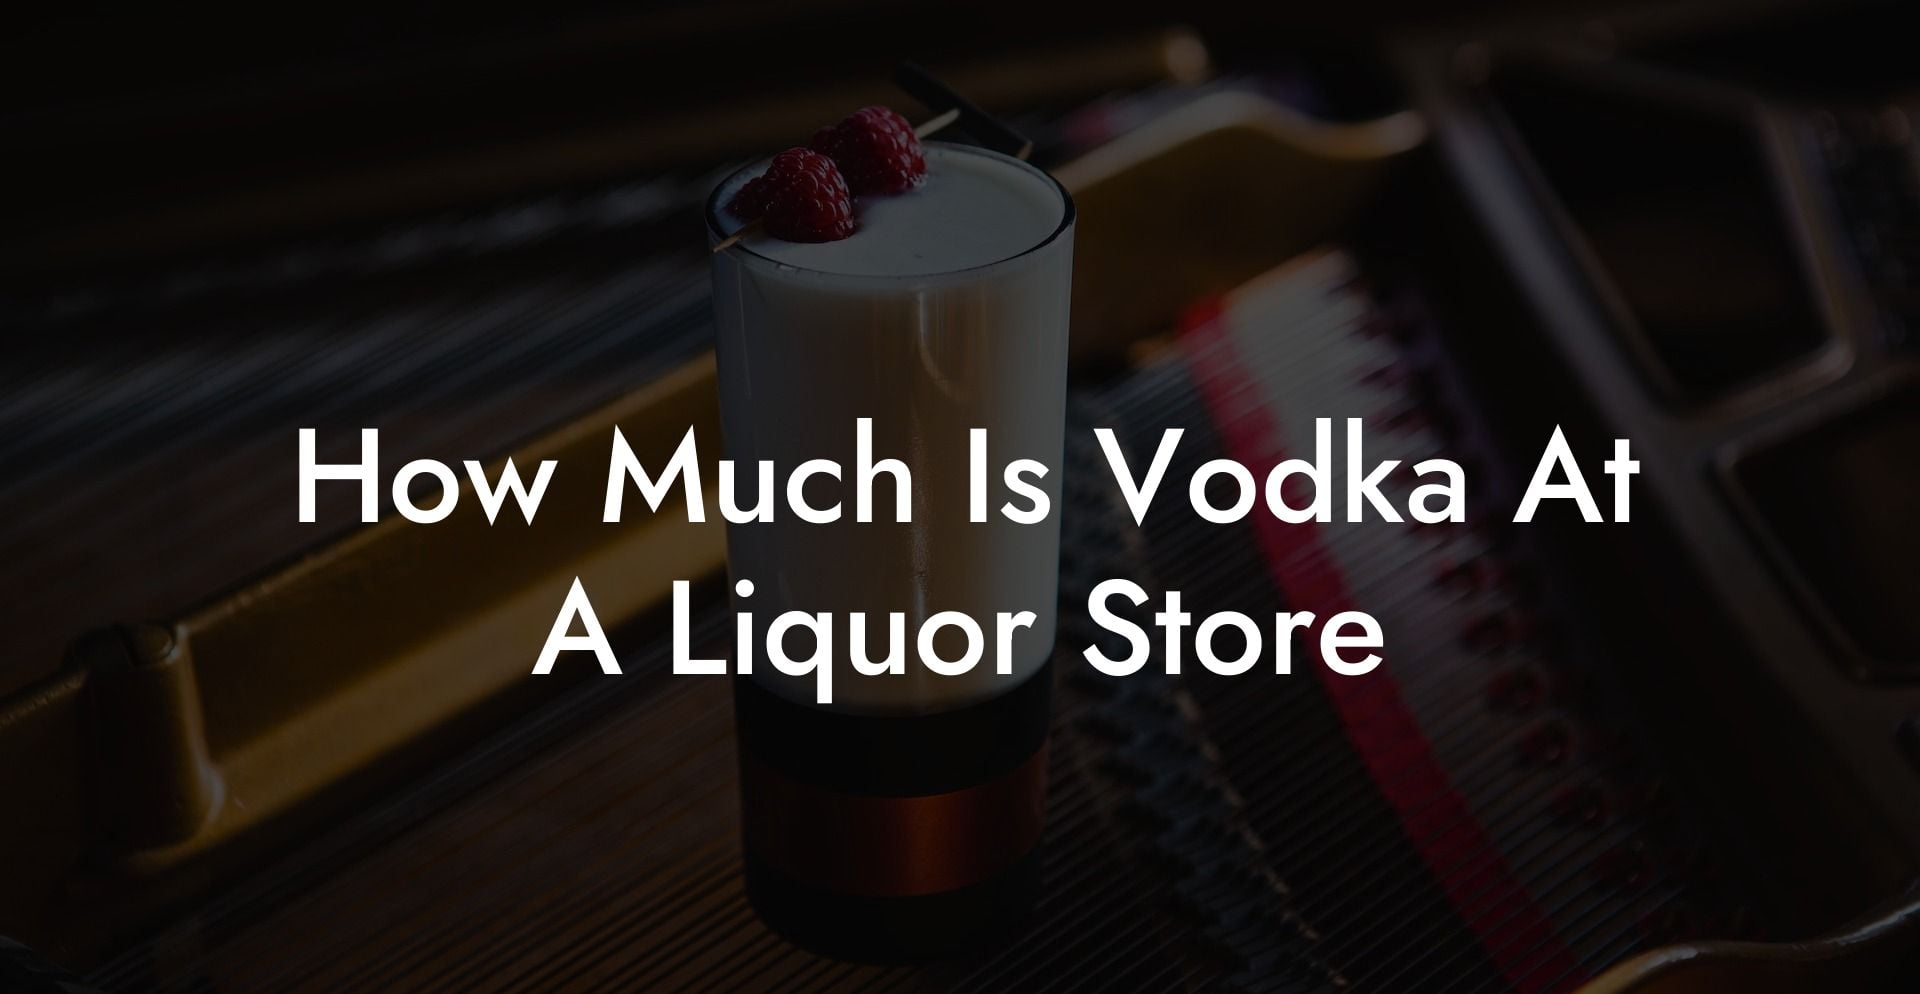 How Much Is Vodka At A Liquor Store